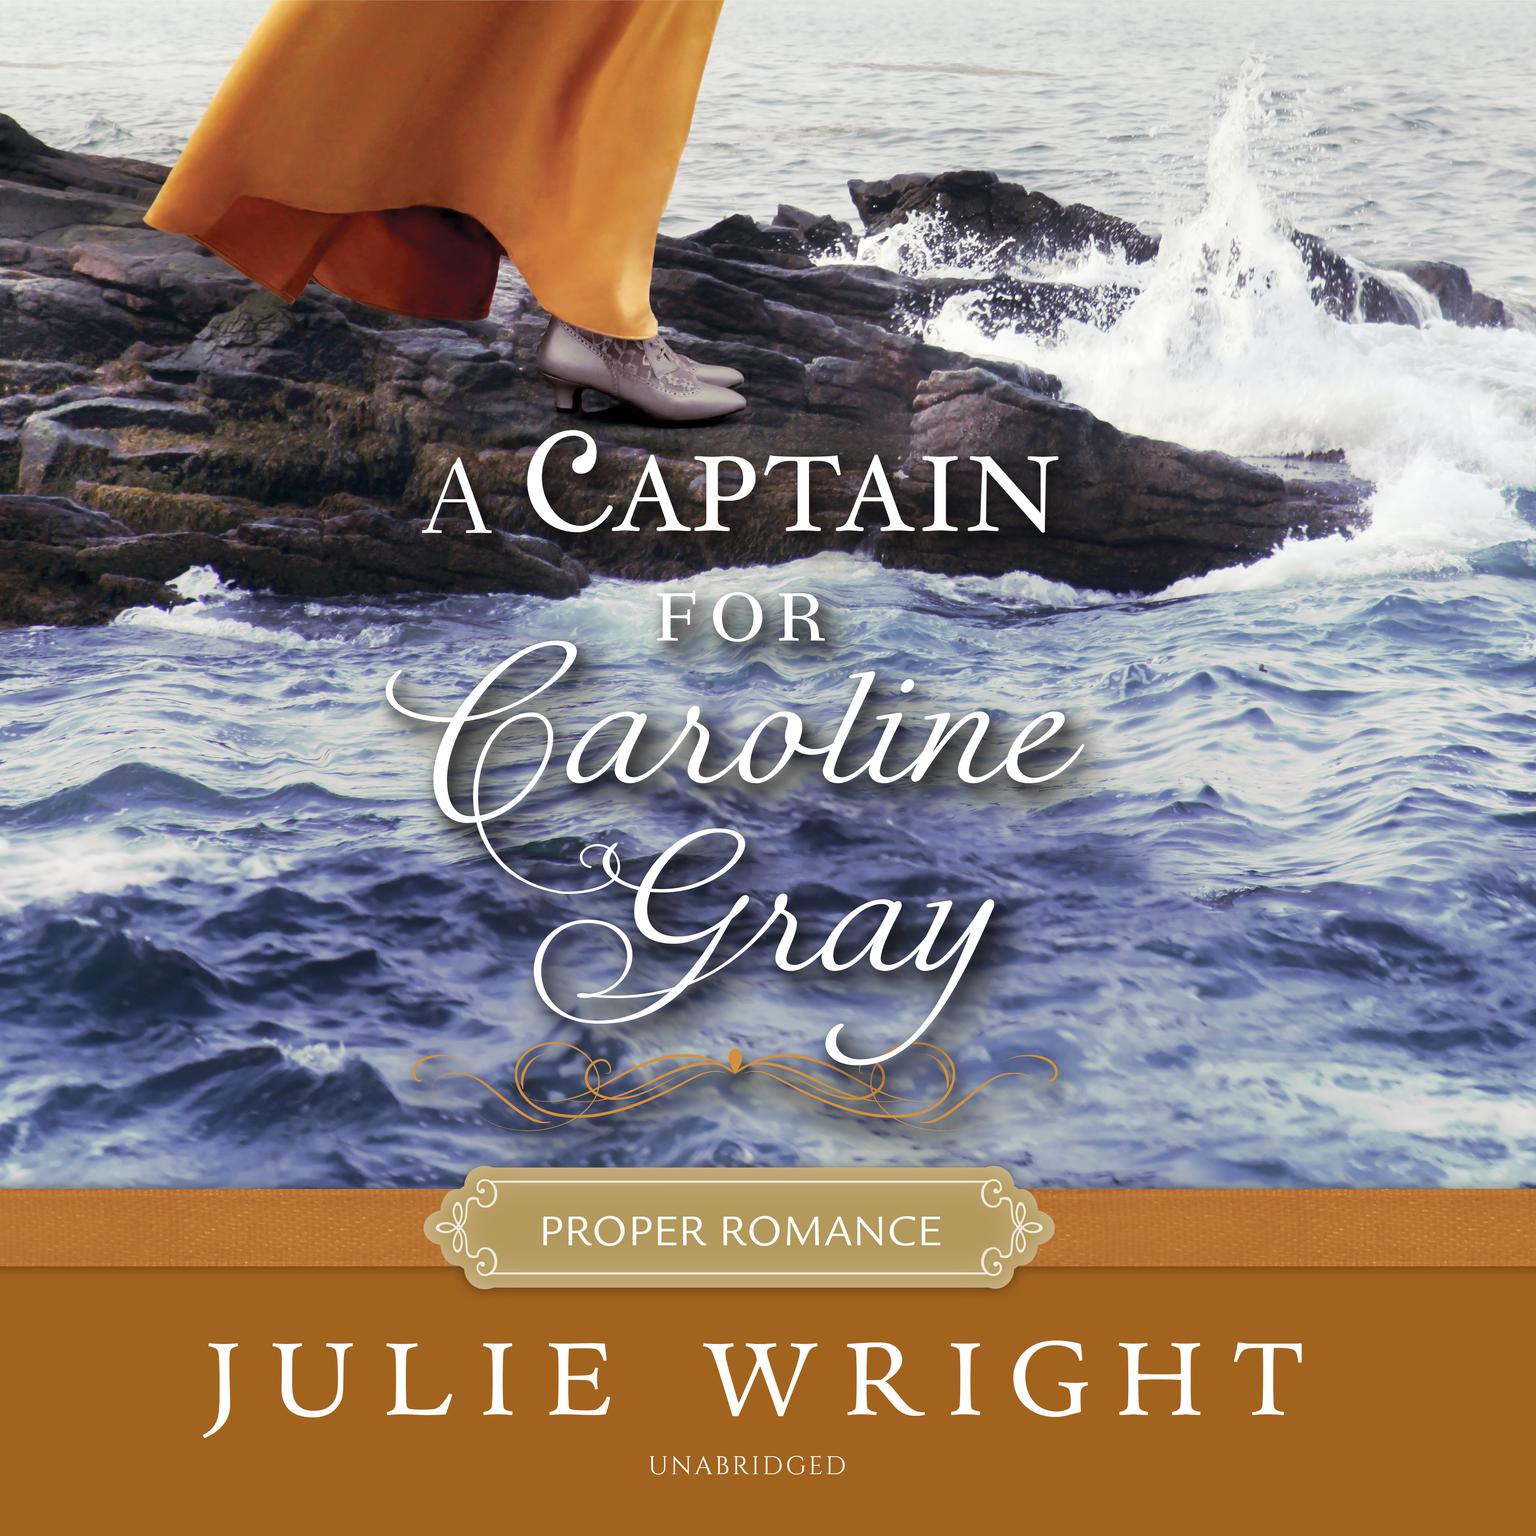 A Captain for Caroline Gray Audiobook, by Julie Wright